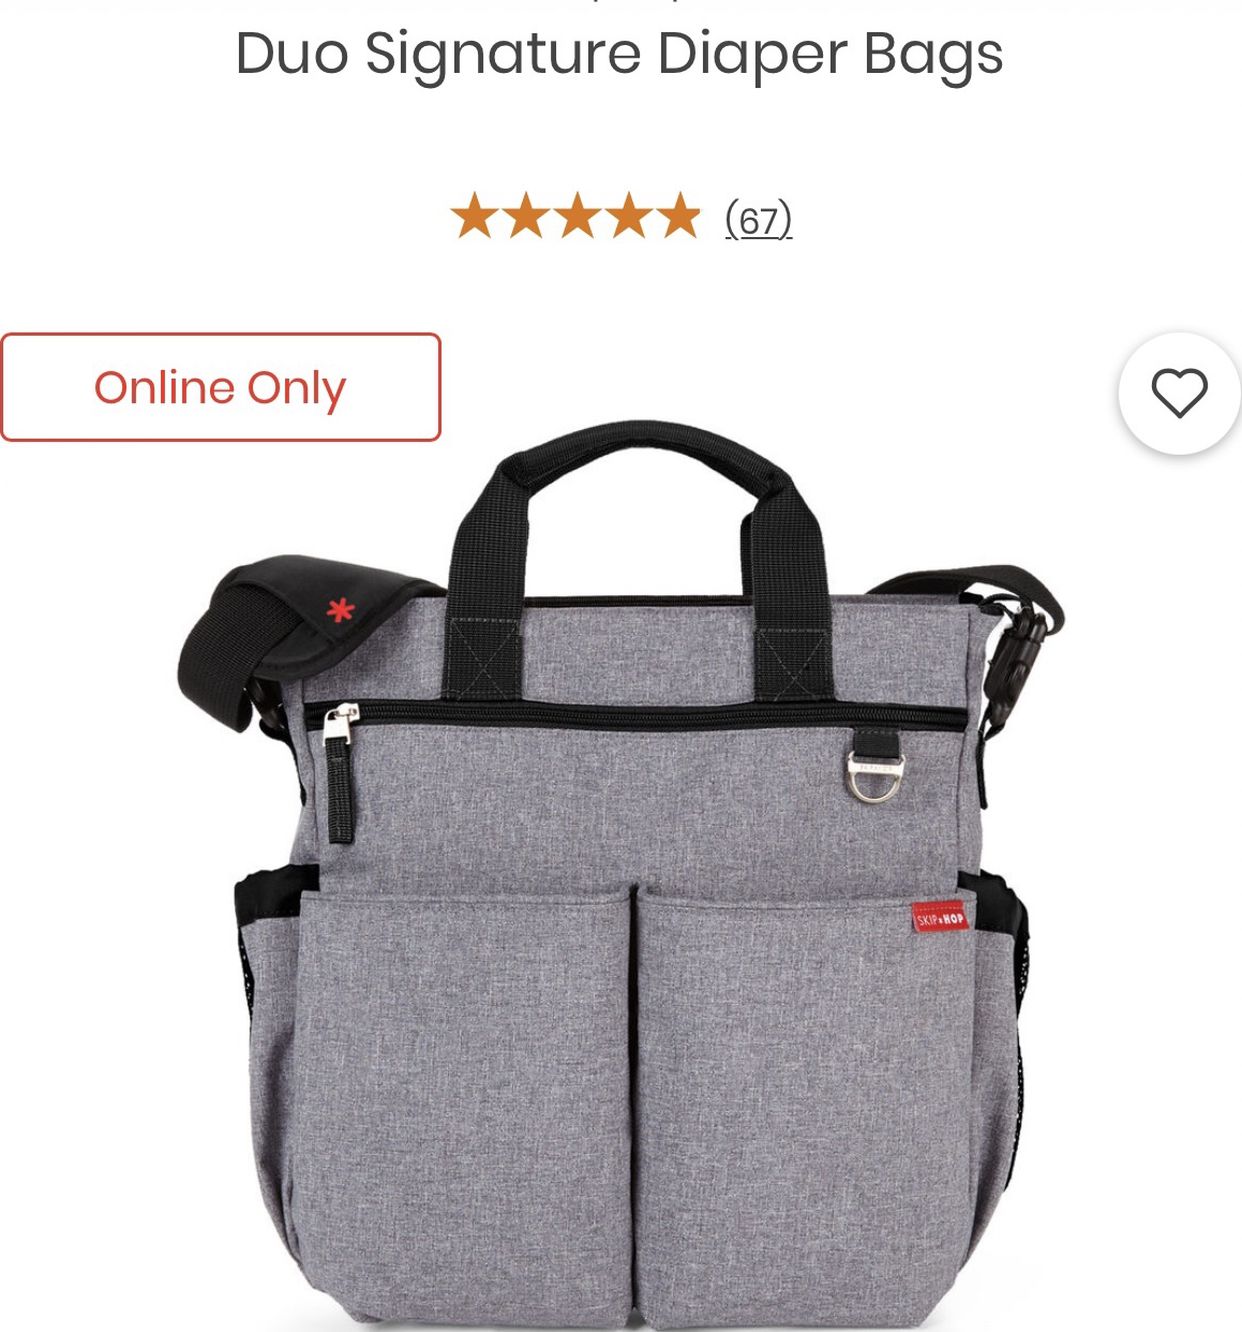 Skip Hop Messenger Diaper Bag without Changing Pad, Duo Signature, Heather Grey. Condition is "Used". See pictures ask questions and make an offer!